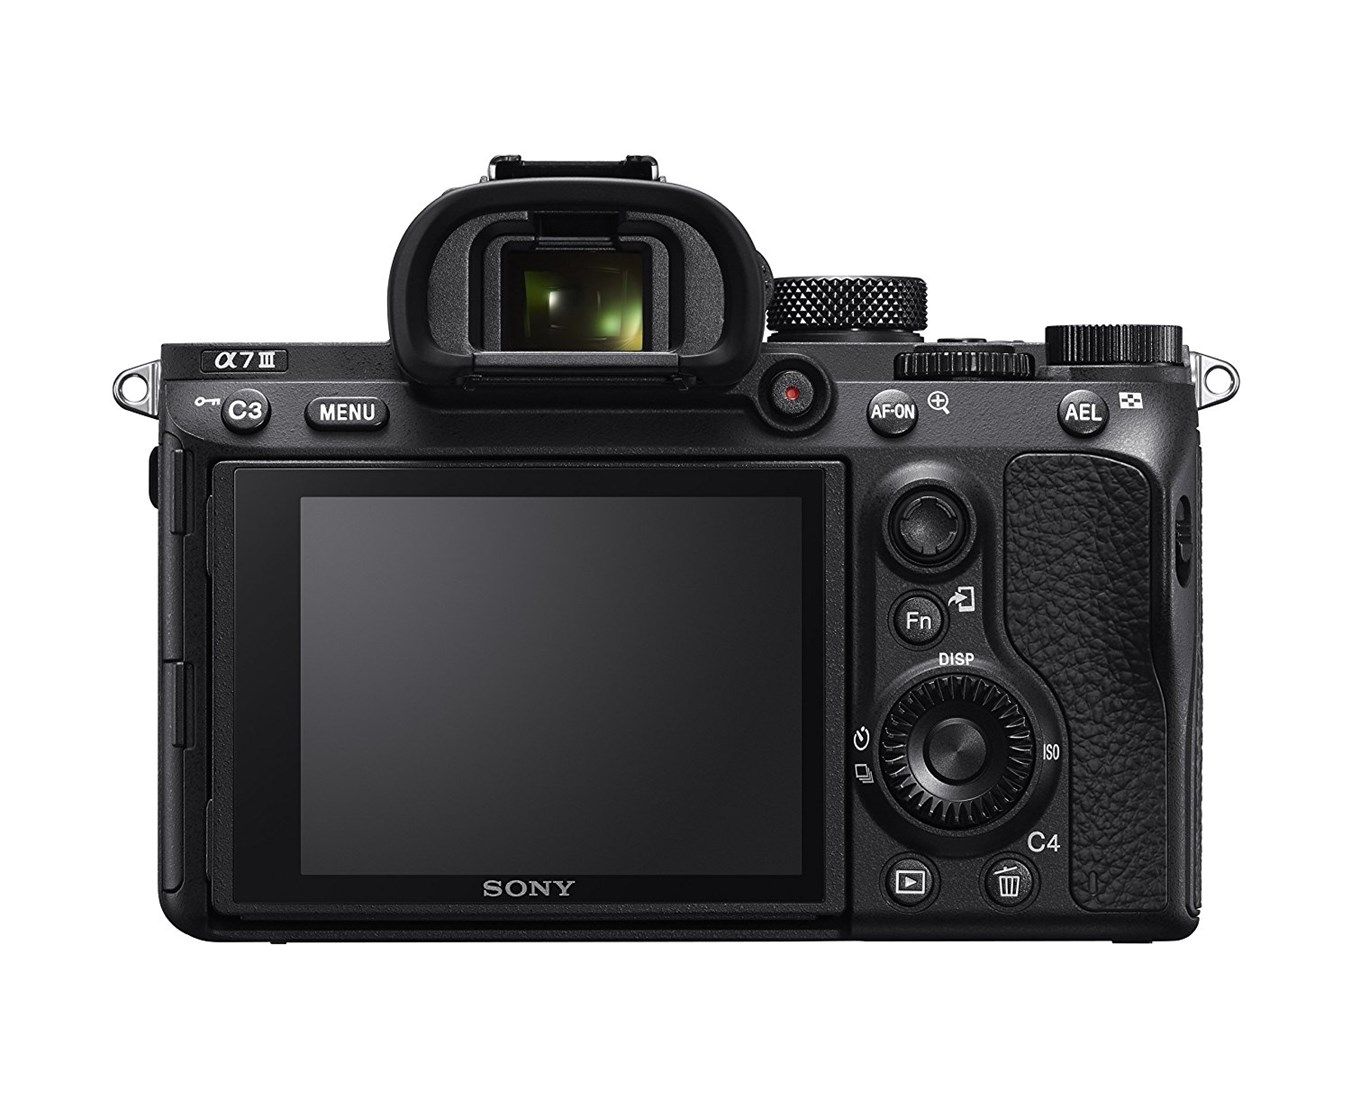 Sony Alpha a7 III Mirrorless Camera - Body only - Product Photo 3 - Rear view of the camera body with the viewfinder, display screen and controls visible